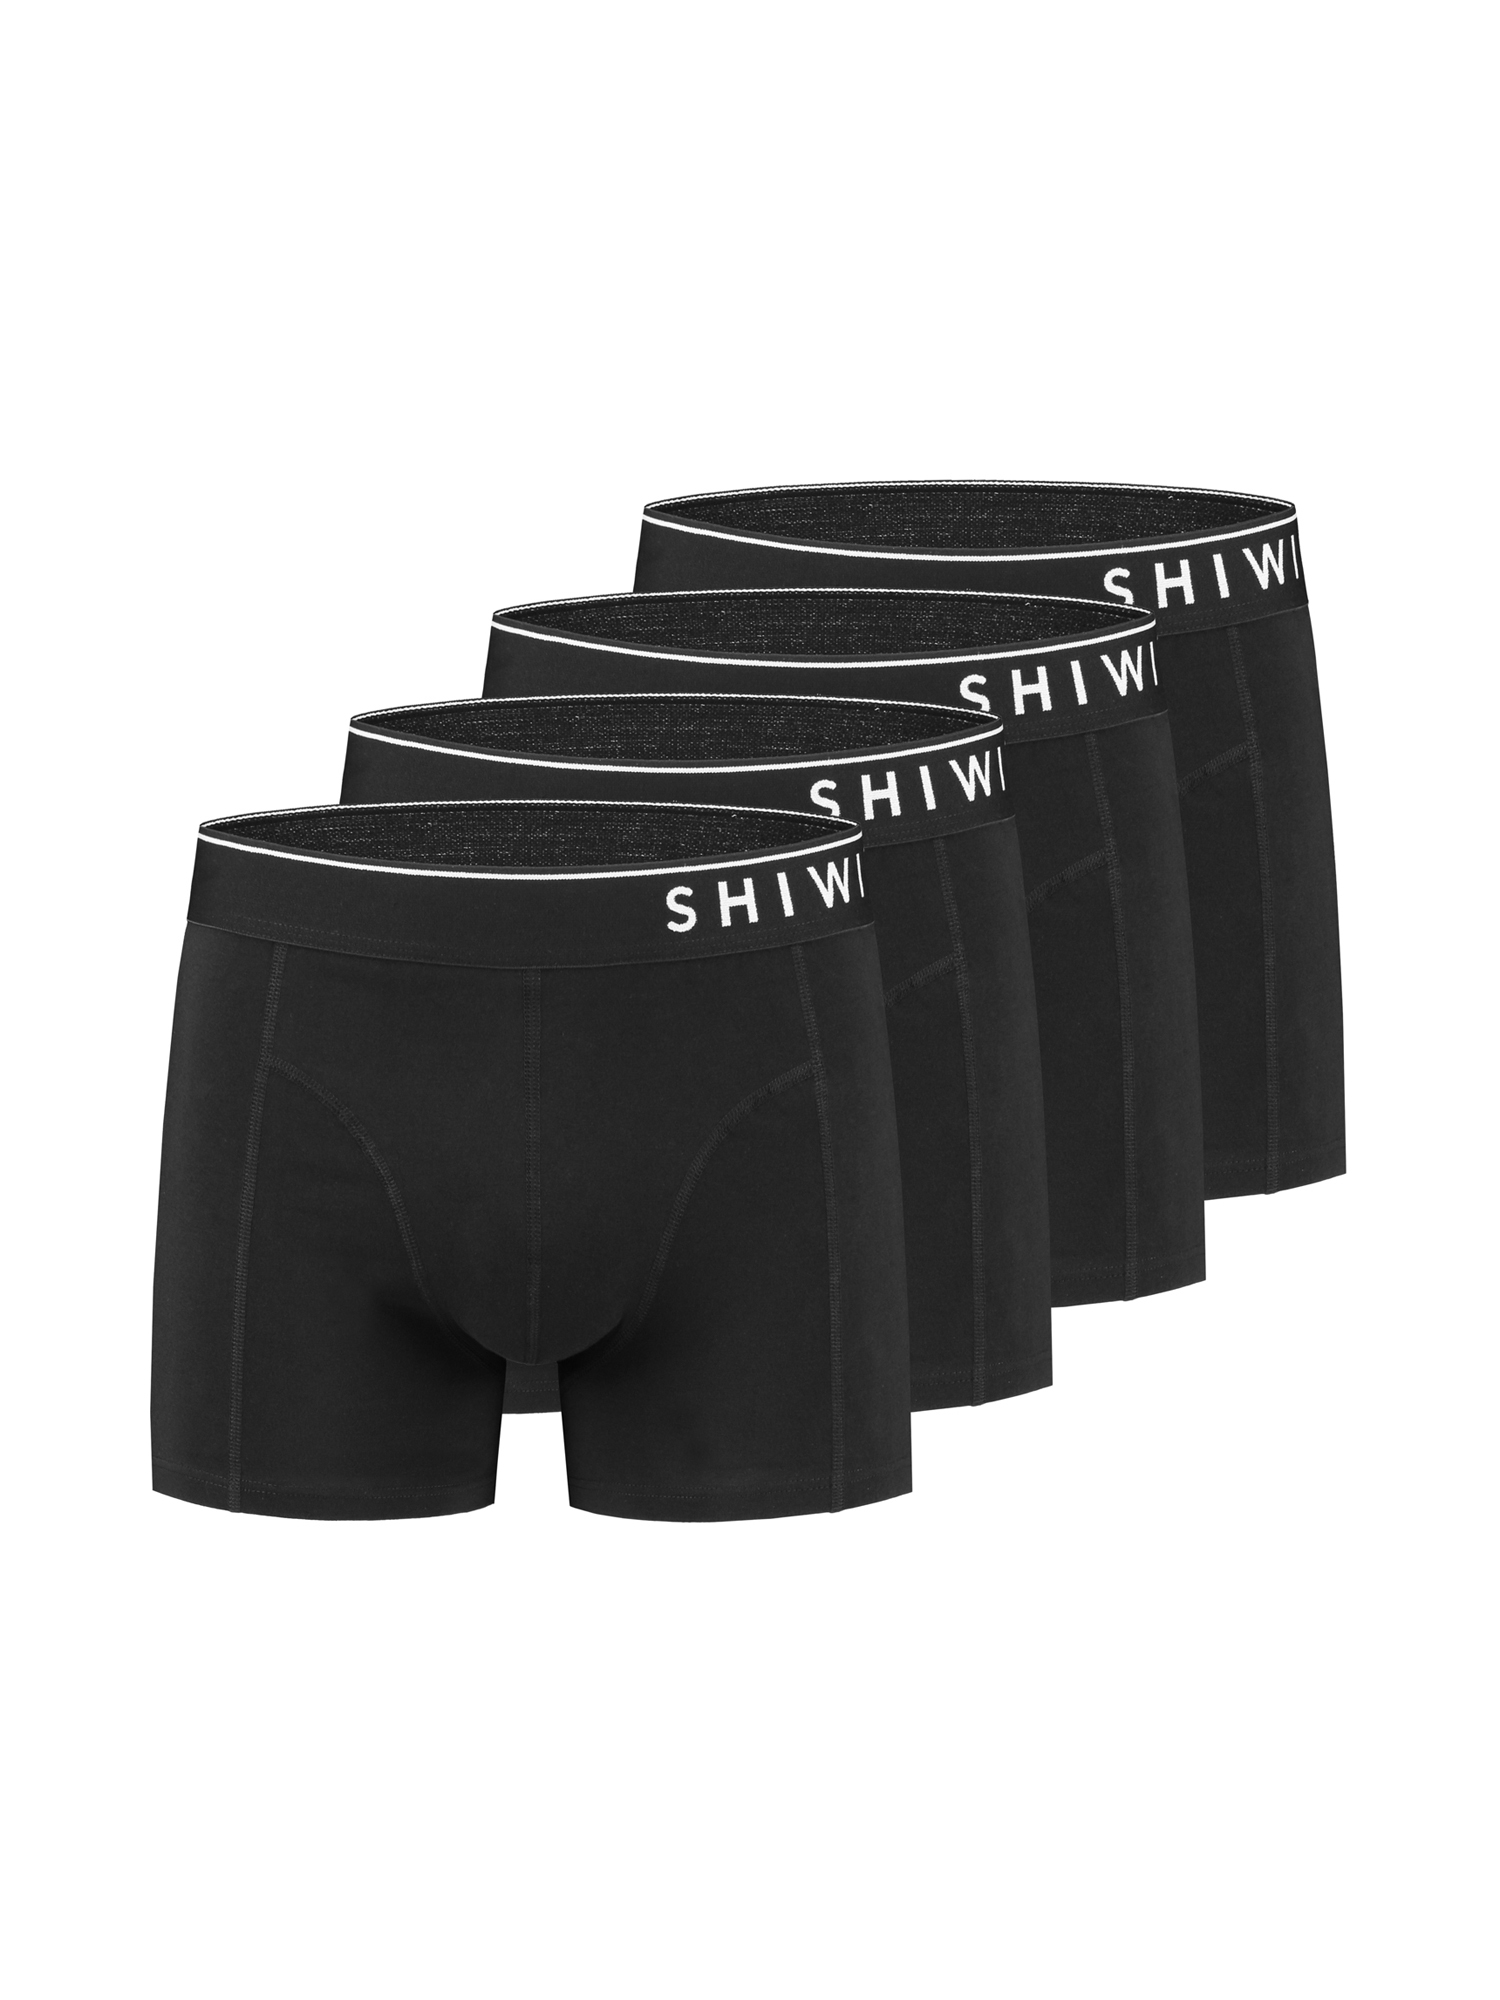 Intimo ft6u6 Shiwi Boxer Solid in Nero 